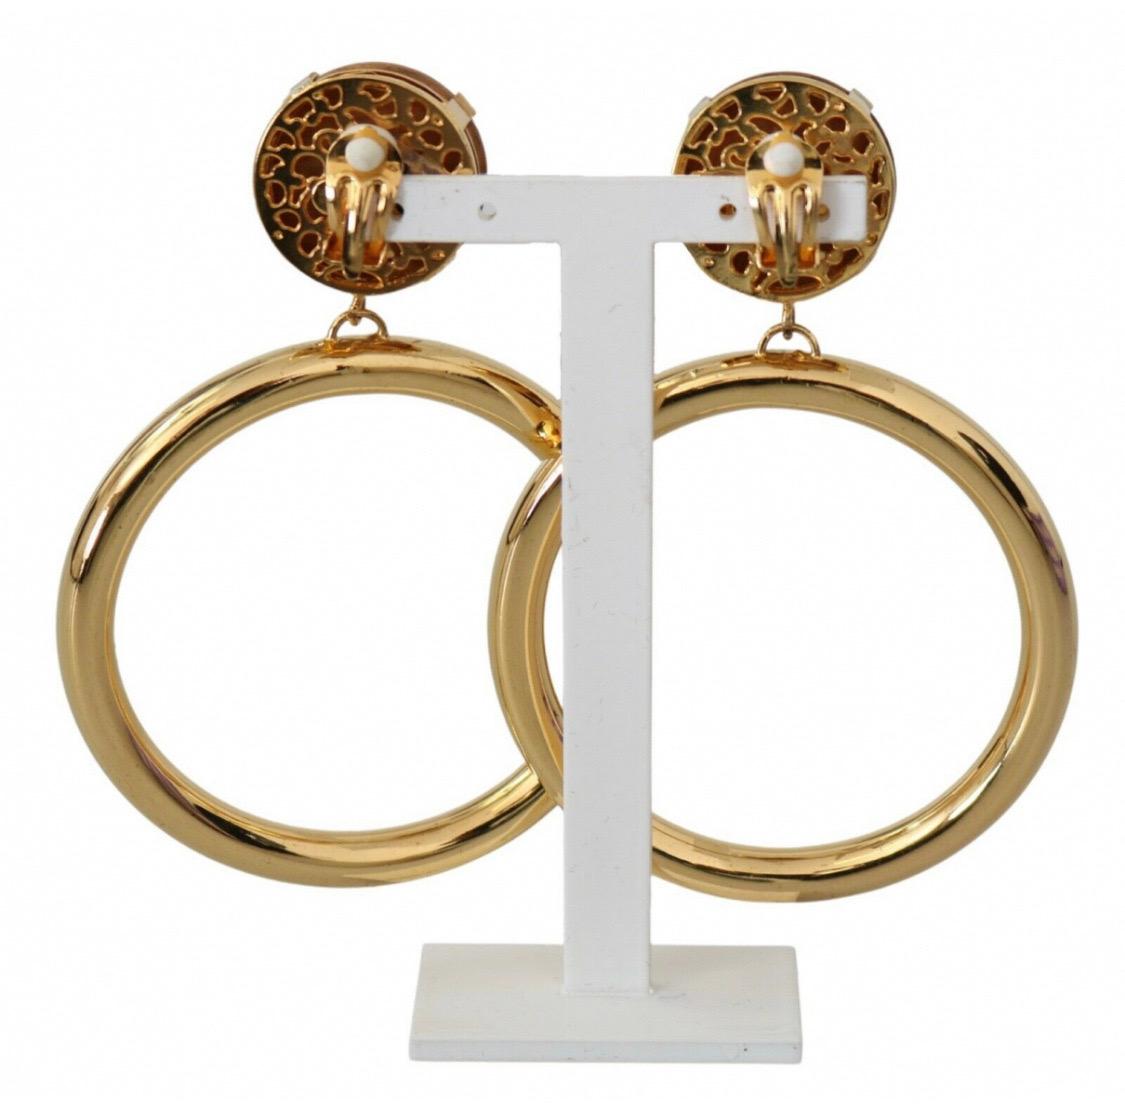 Dolce & Gabbana gold brass
hoop earrings with wooden clip on 1